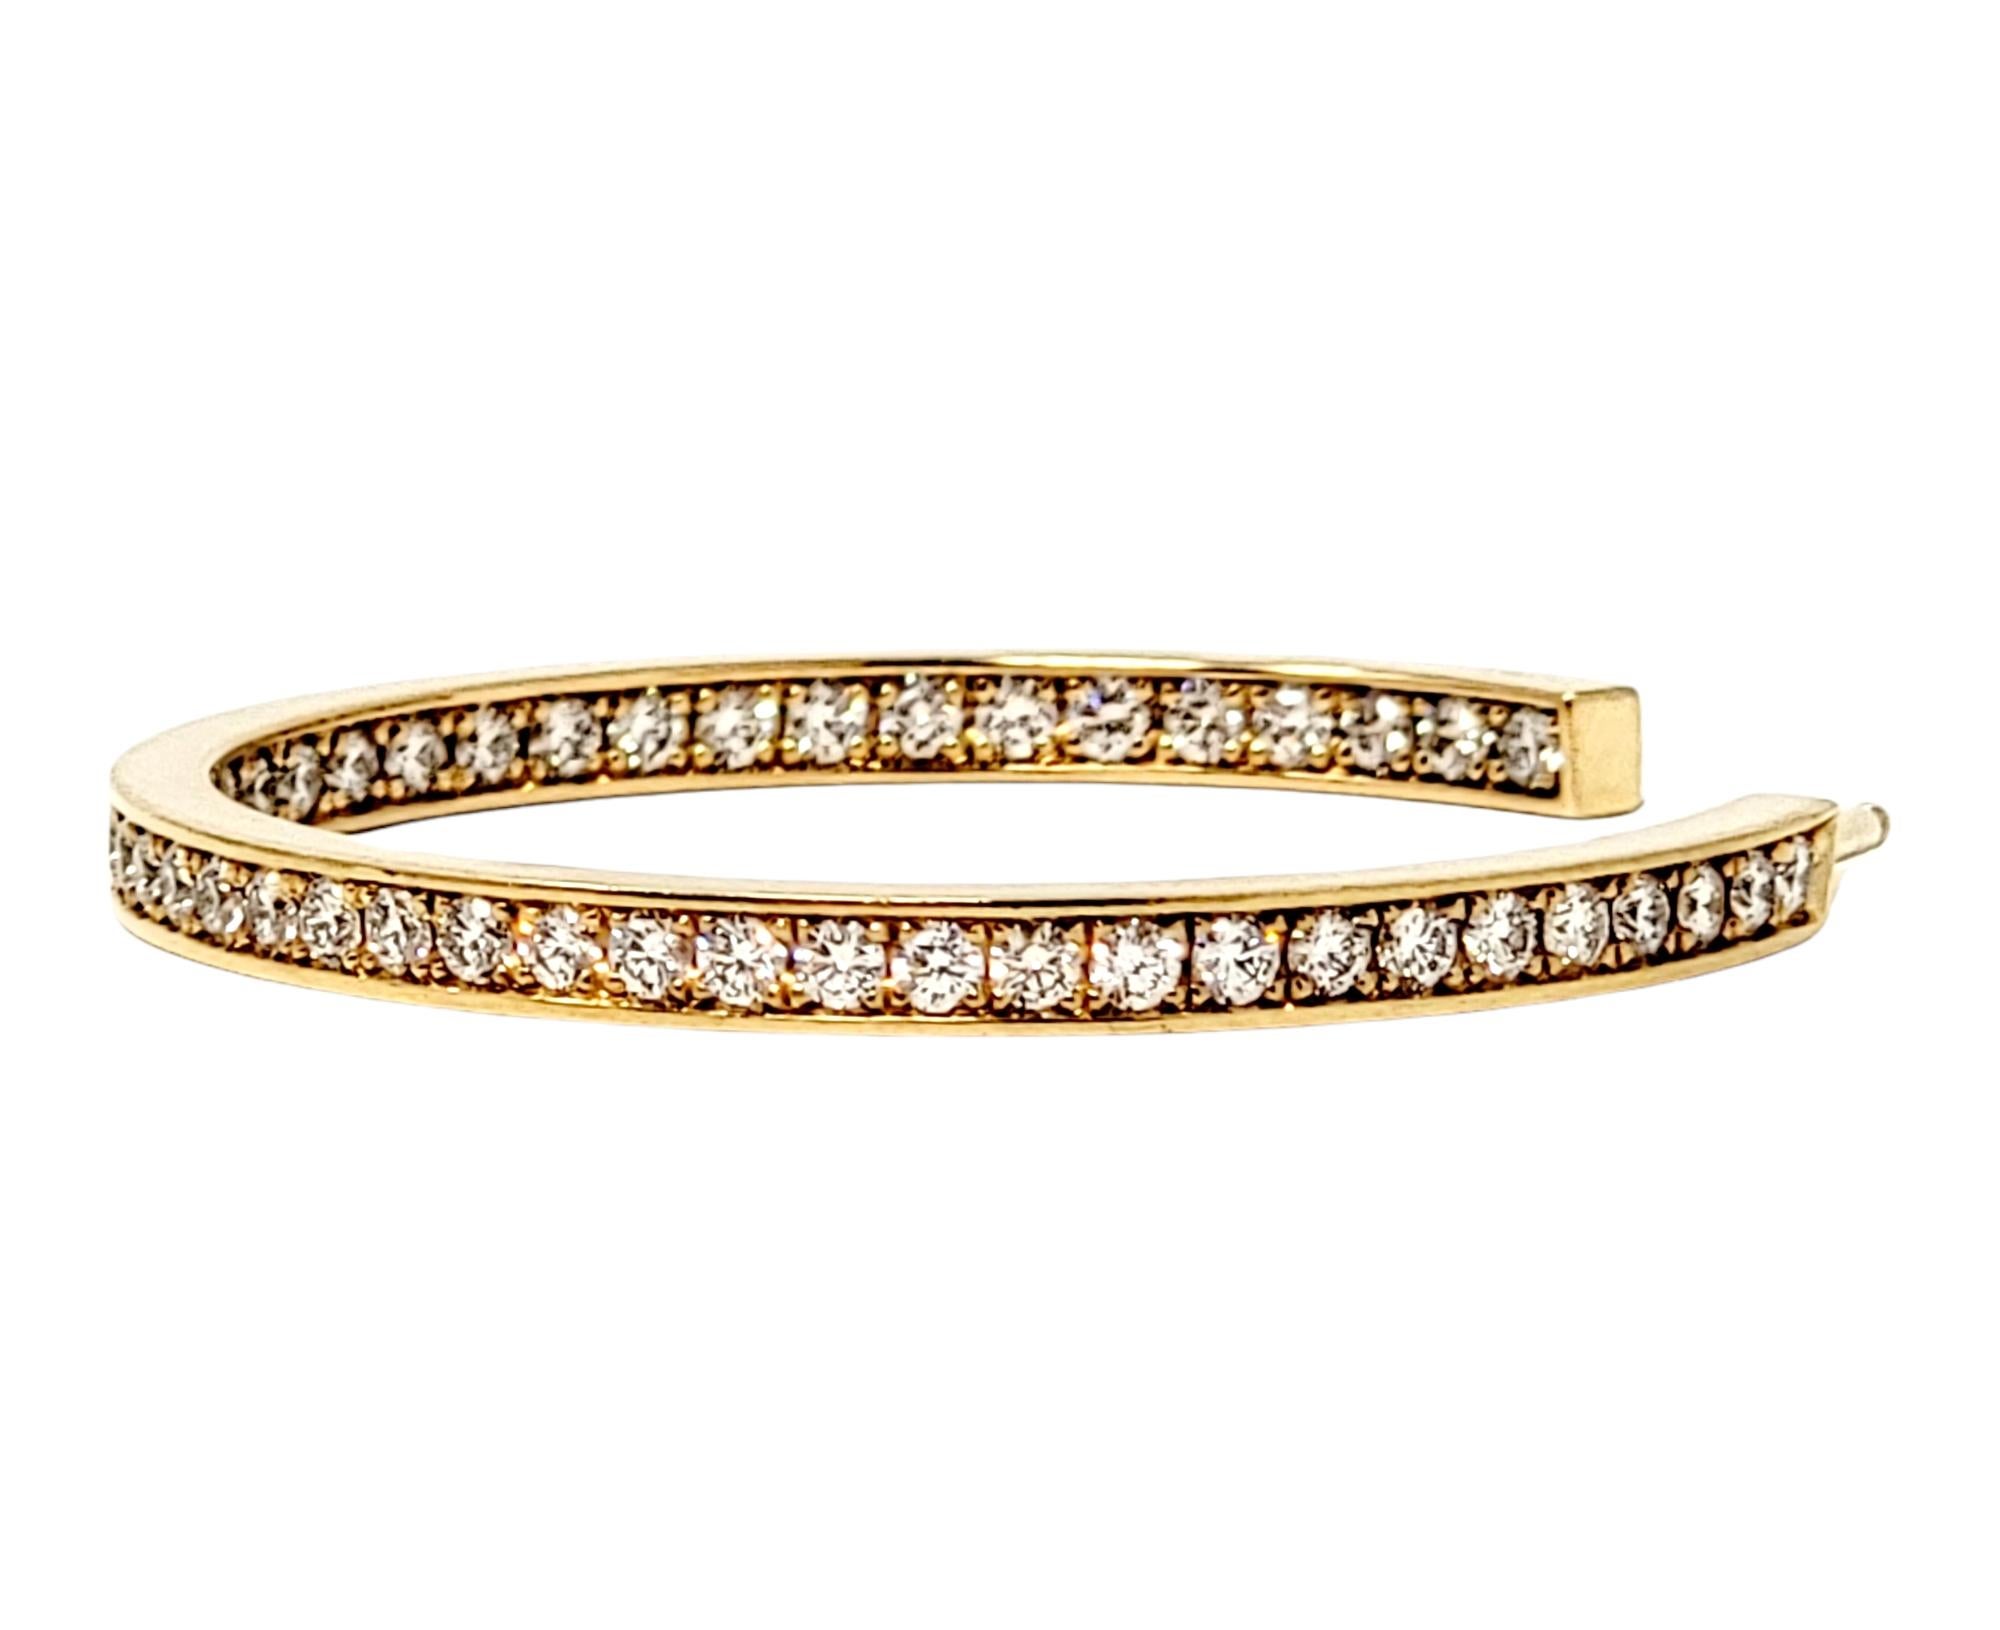 Cartier 2.00 Carat Round Diamond Inside-Outside Large Hoop Earrings Yellow Gold In Good Condition For Sale In Scottsdale, AZ